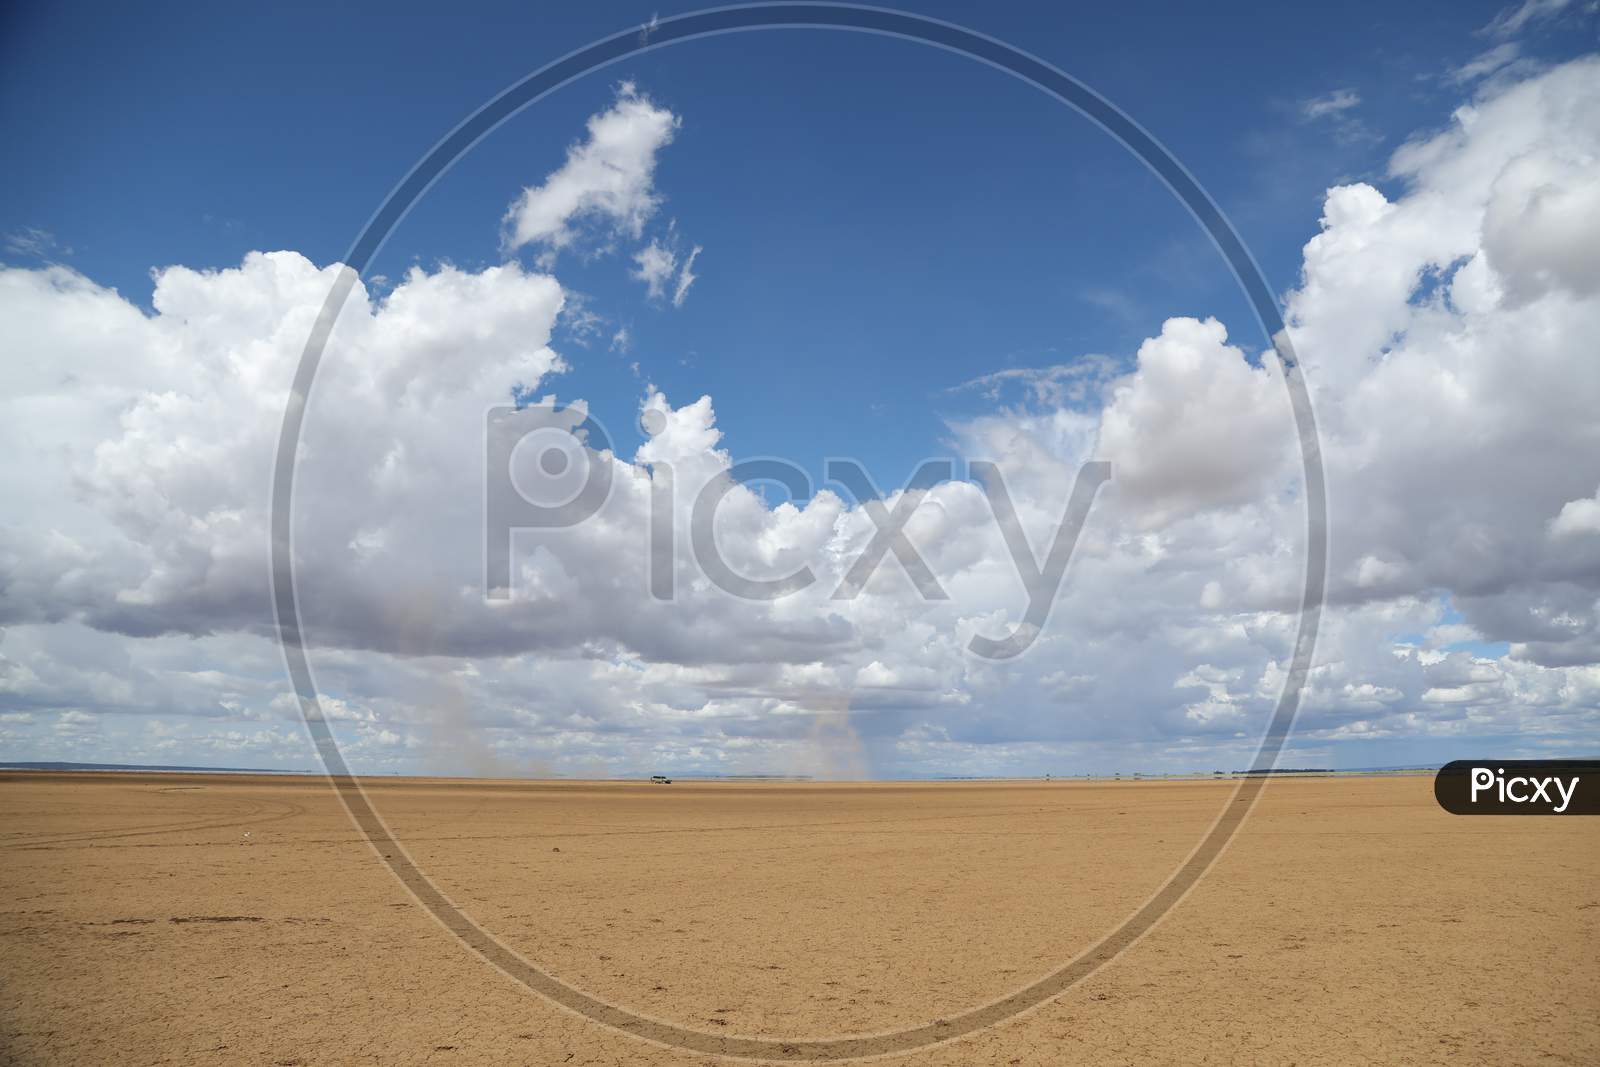 A Cloudy day in Kenya